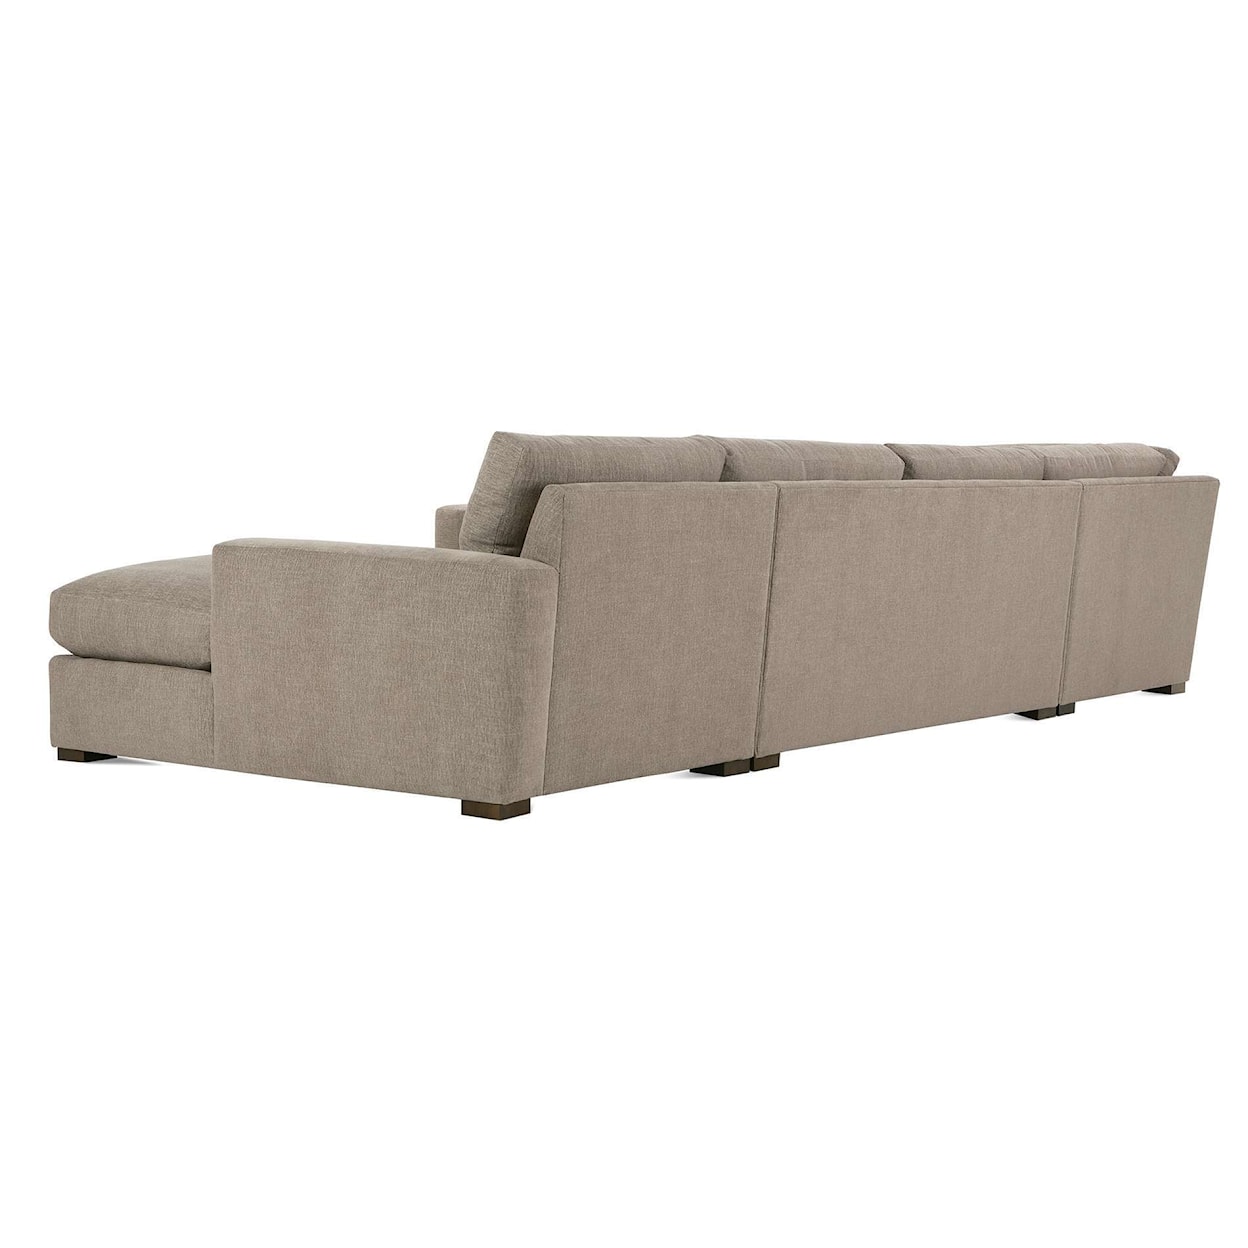 Rowe Moore 3-Piece Sectional Sofa